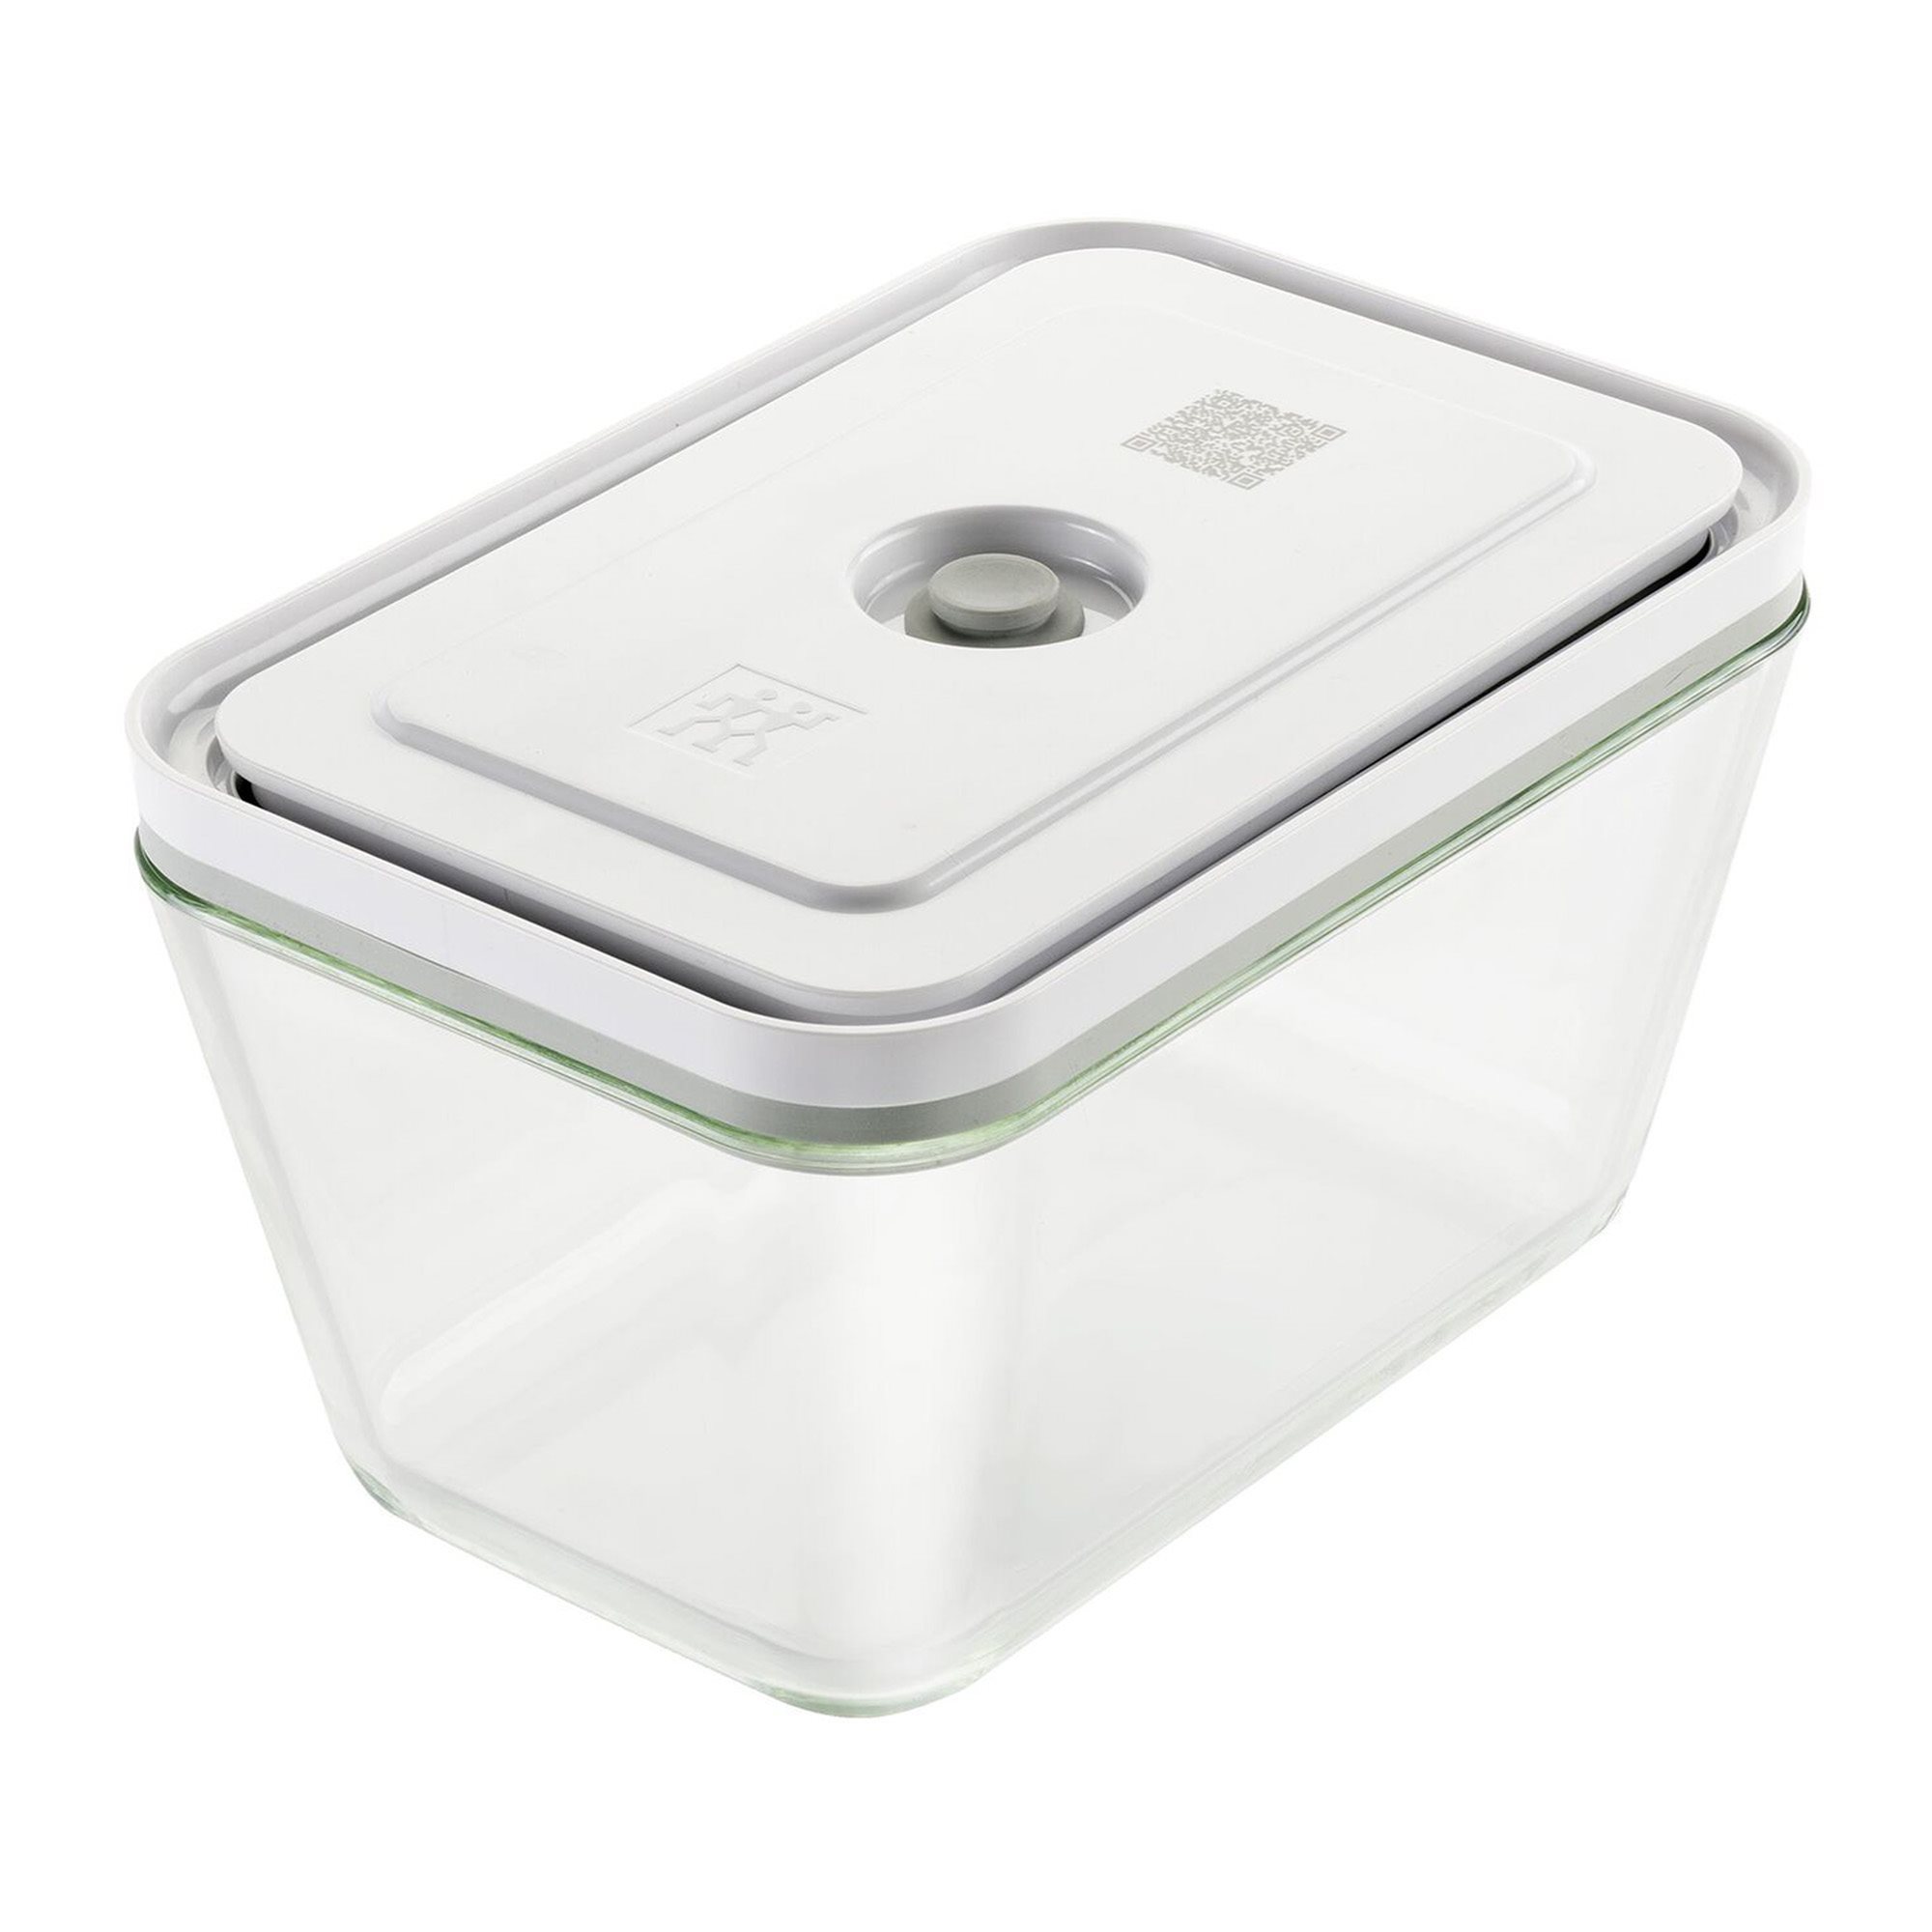 Food vacuum container FRESH & SAVE M 900 ml, white, glass